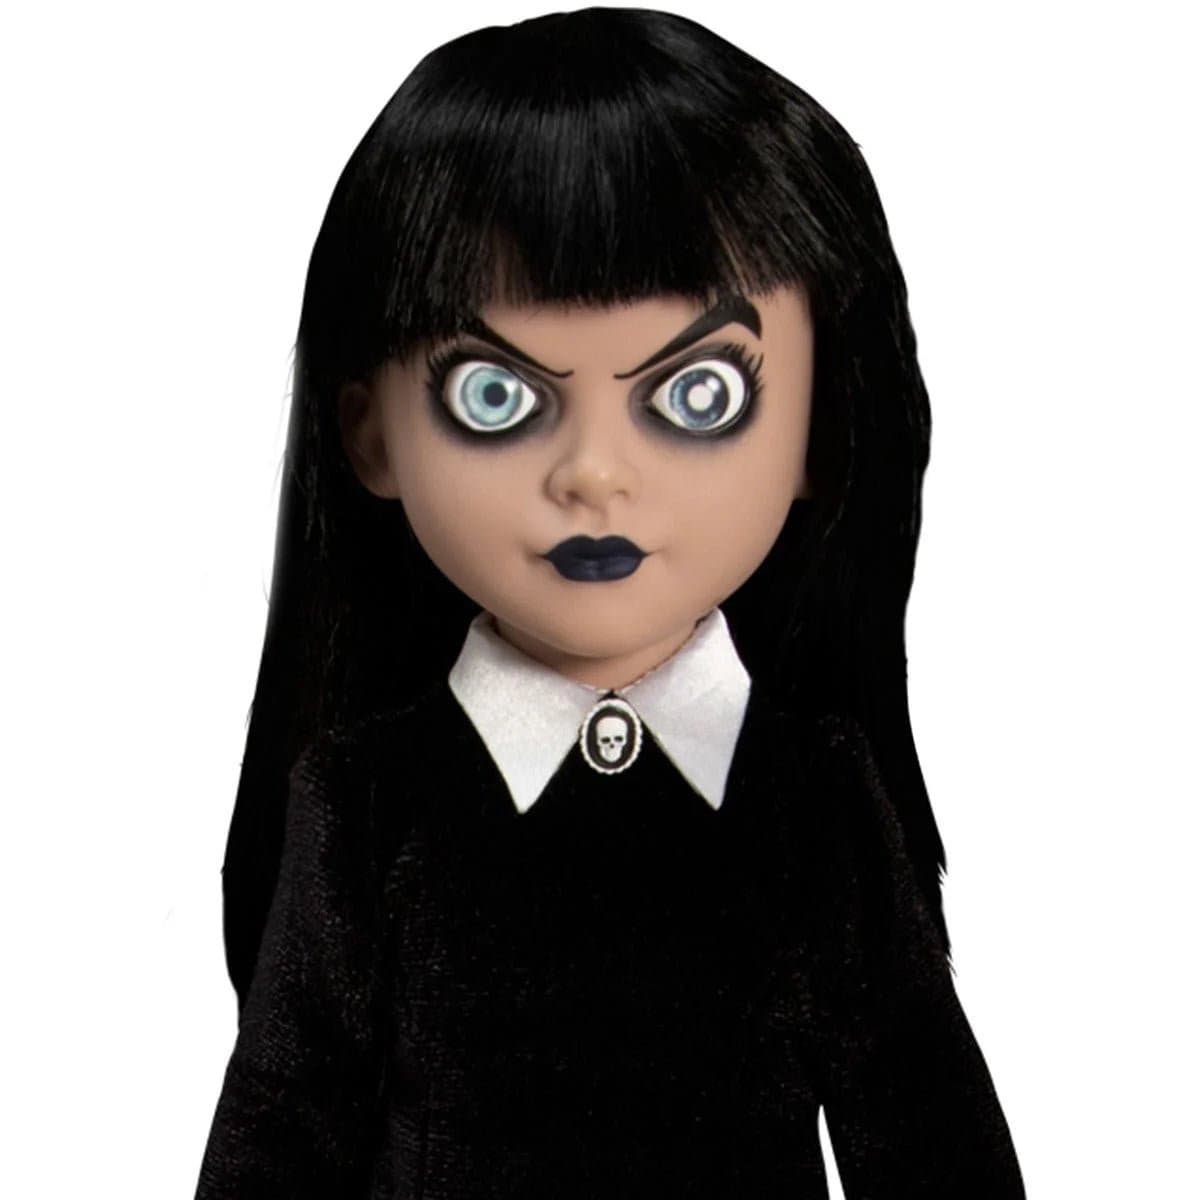 LIVING DEAD DOLLS Presents Sadie 10-Inch Doll - Simon's Collectibles